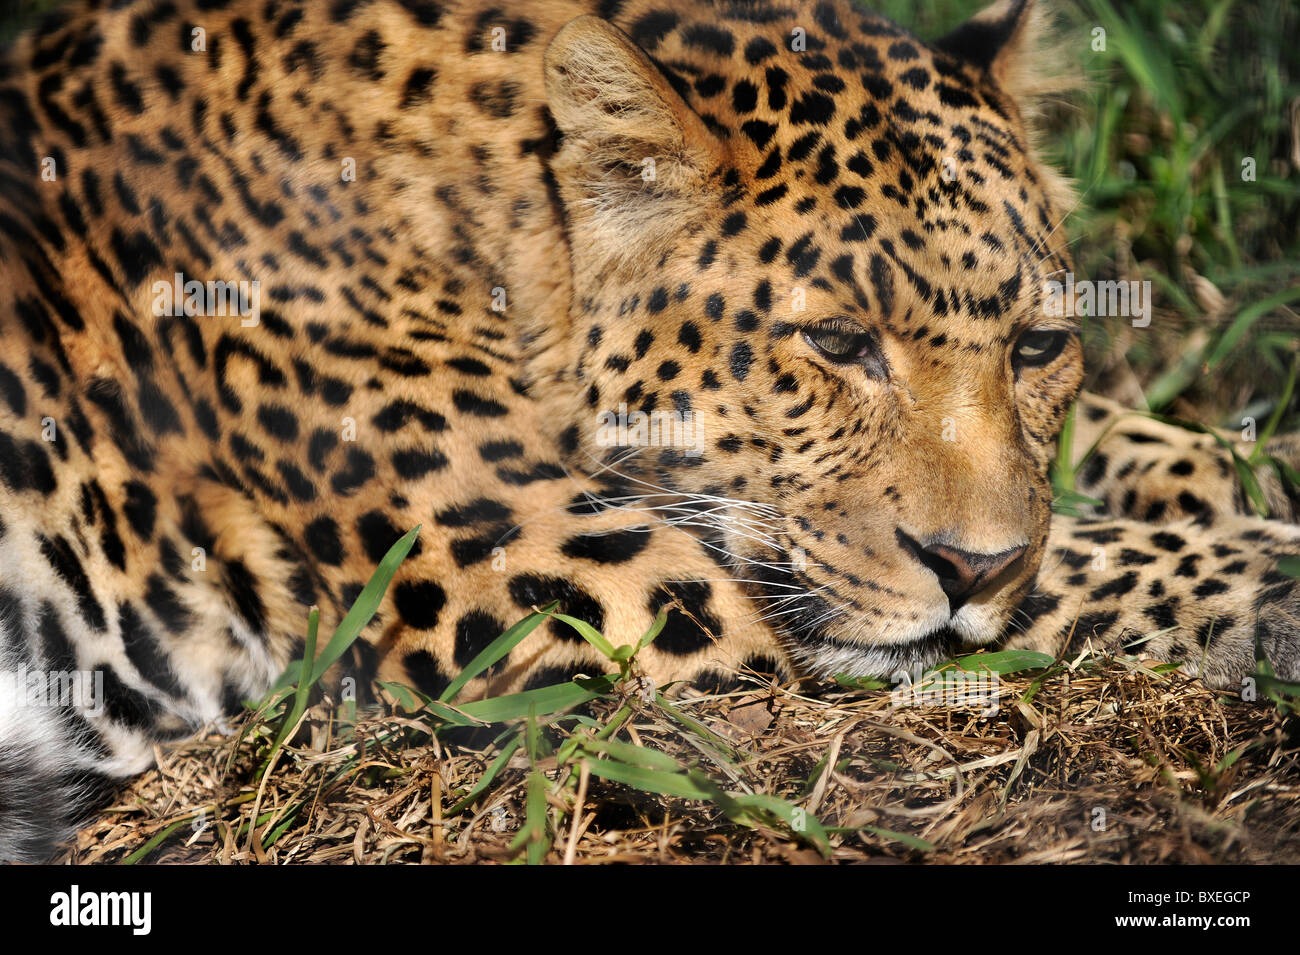 A leopard crouches, rests, sleeps in a zoo, on the savanna in Africa's jungle on safari. Tourists attraction in San Diego. Stock Photo